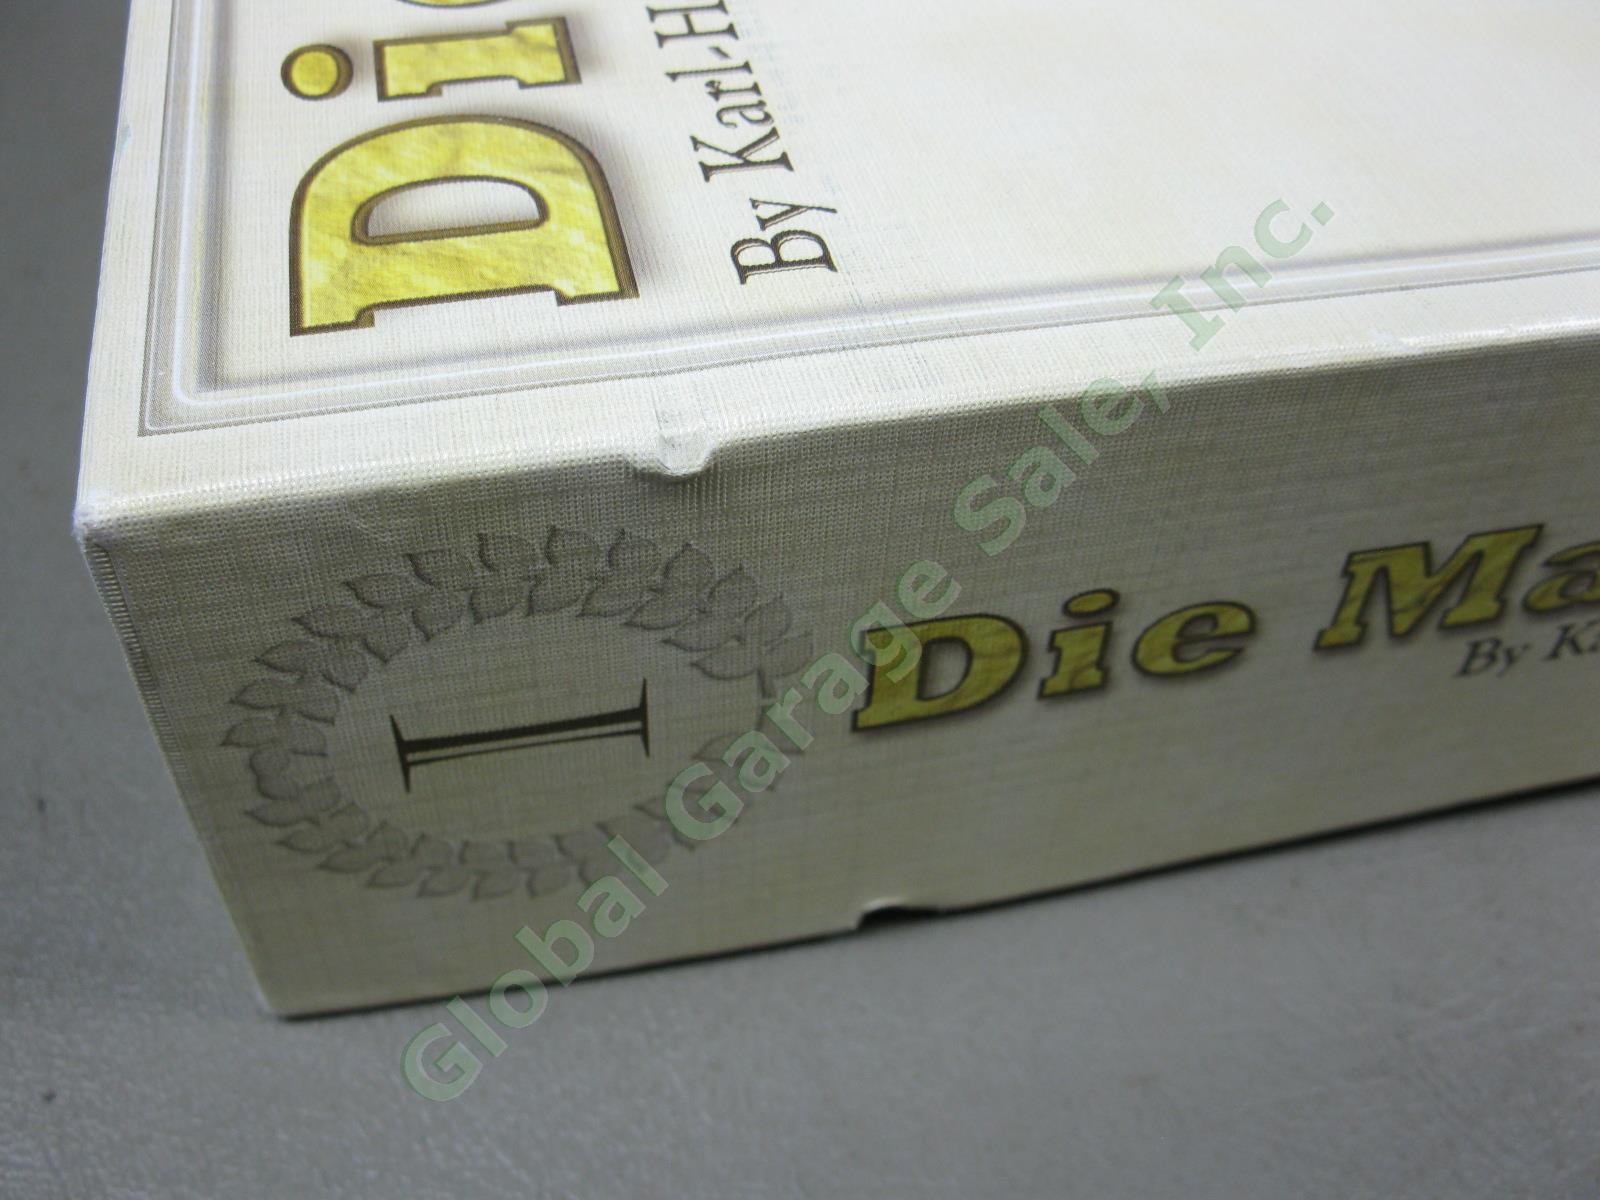 Rare OOP 2006 Die Macher Board Game W/ Box Valley Inc Appears Complete Near Mint 6